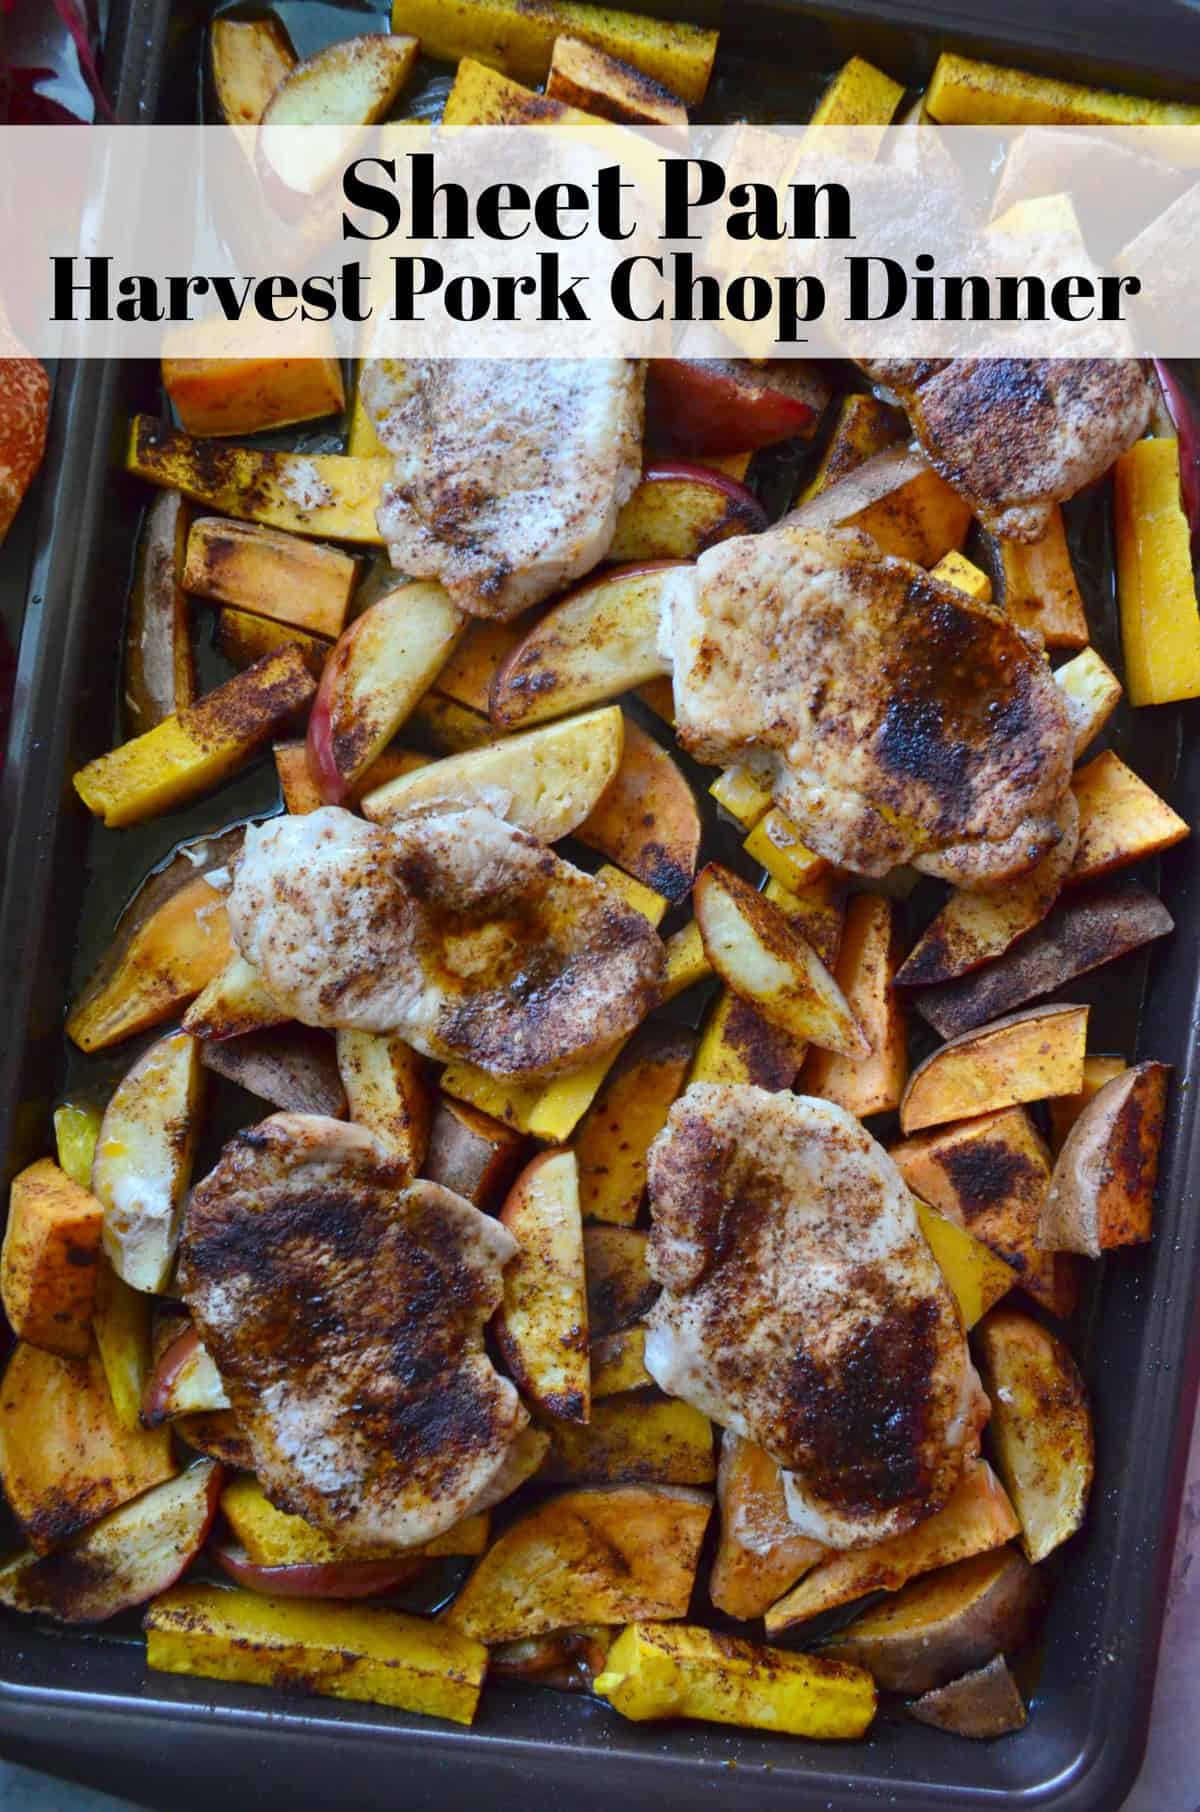 top view of seasoned pork chops, sliced apples, and sliced butternut squash on sheet pan with title text.